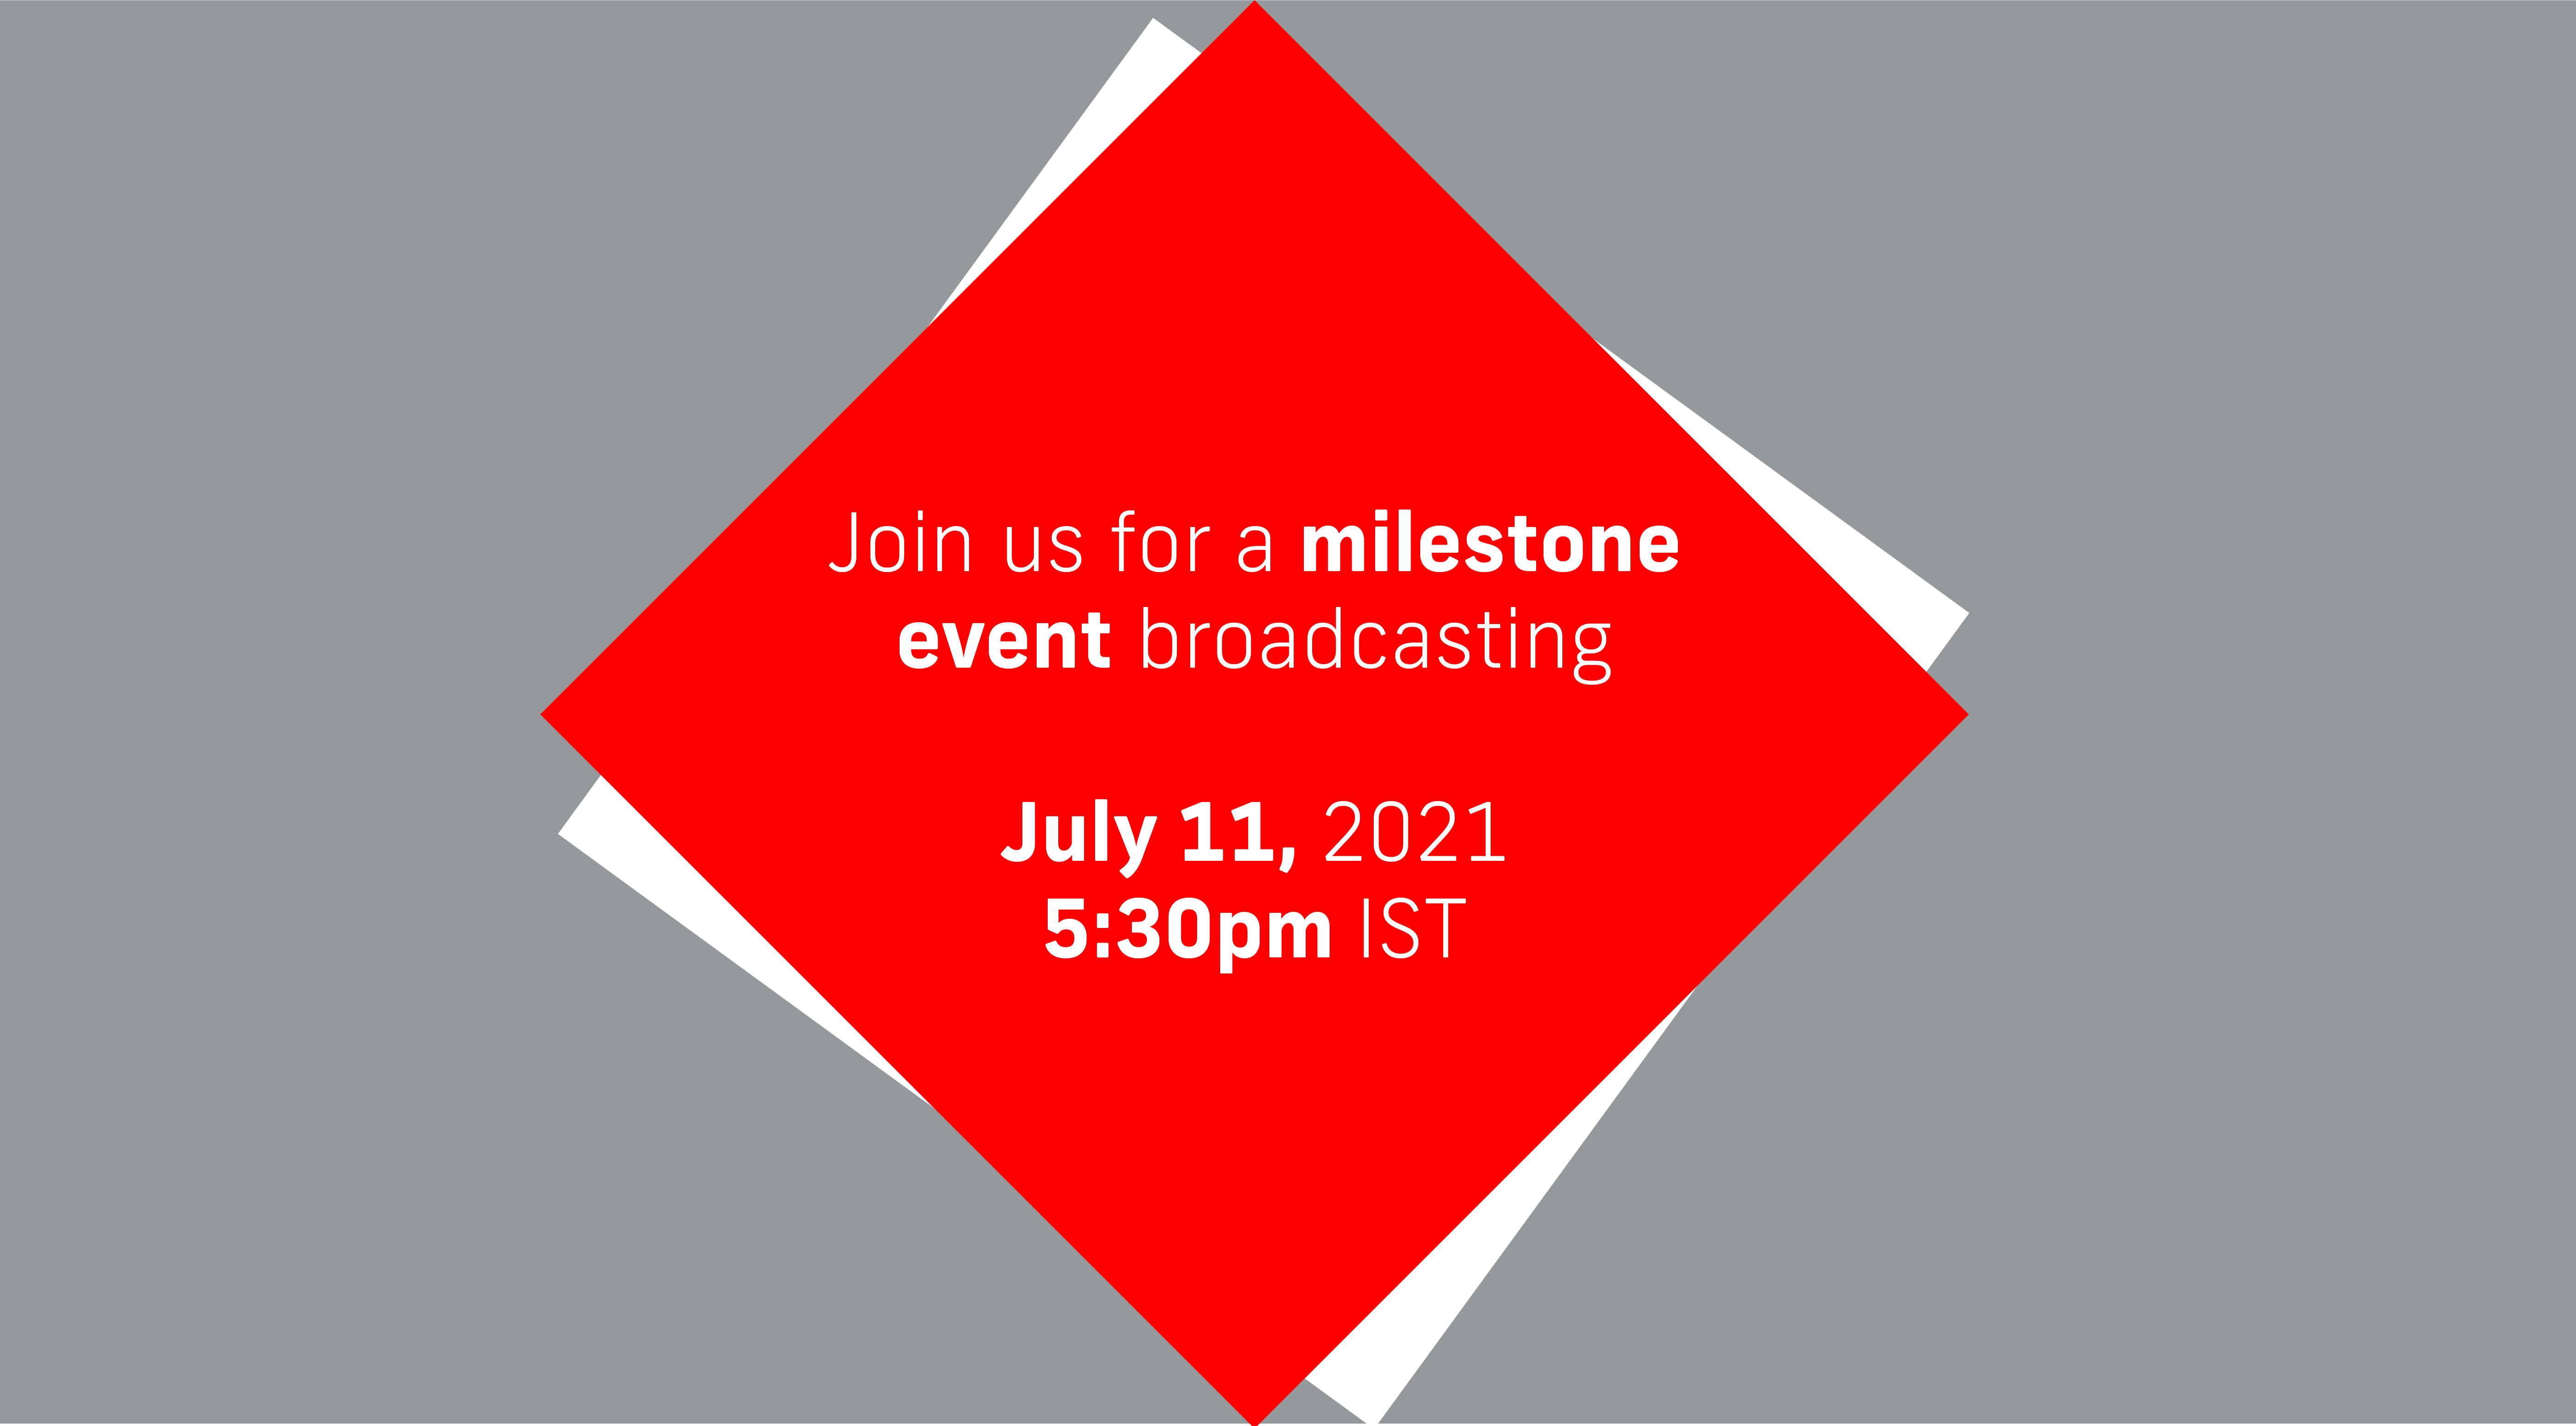 YPS Historic Milestone Event - happening on 11 July at 5:30 PM IST